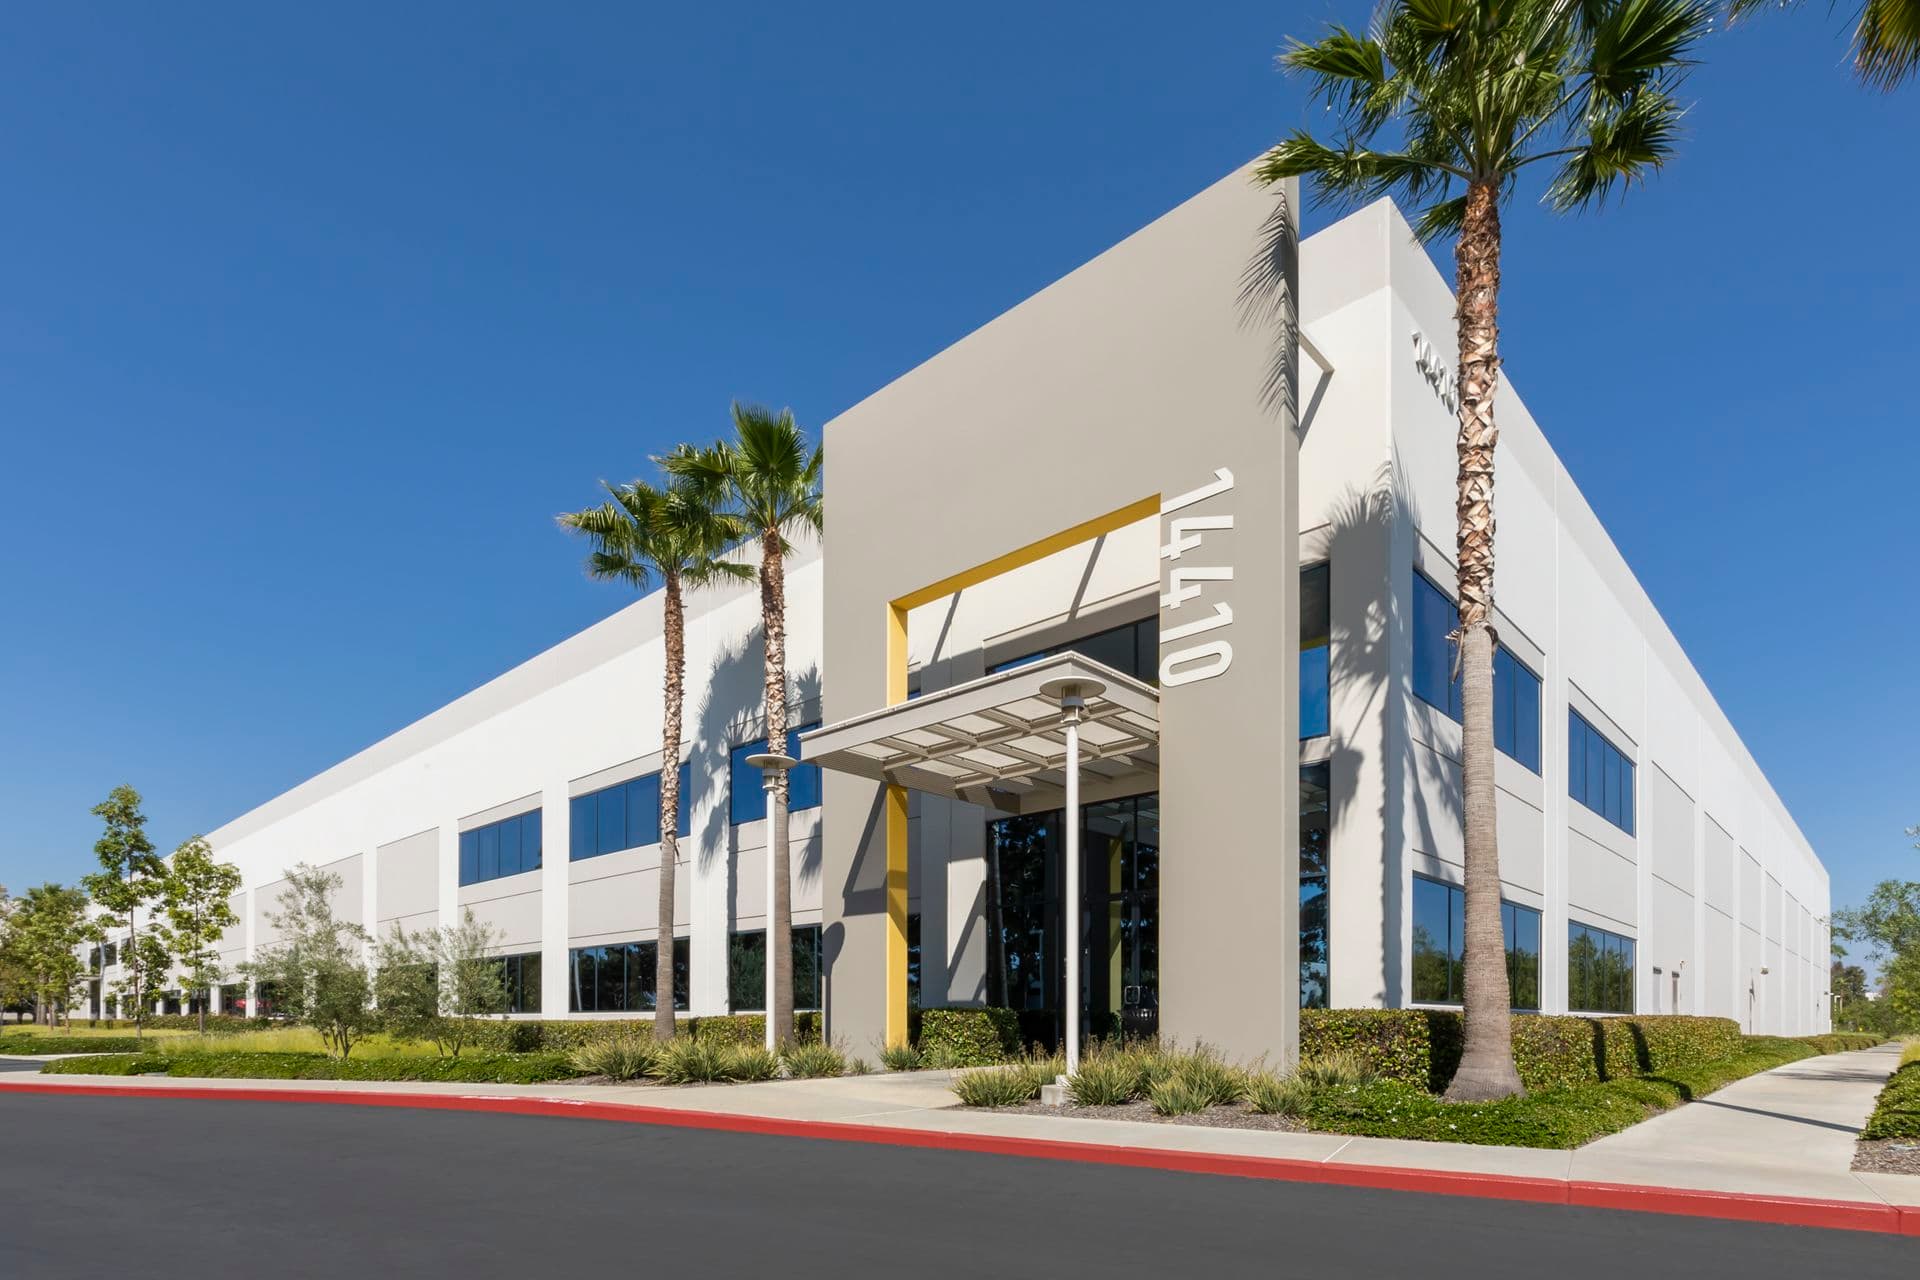 Exterior photography of the 14410 Myford Road mid-tech building in Irivne, California